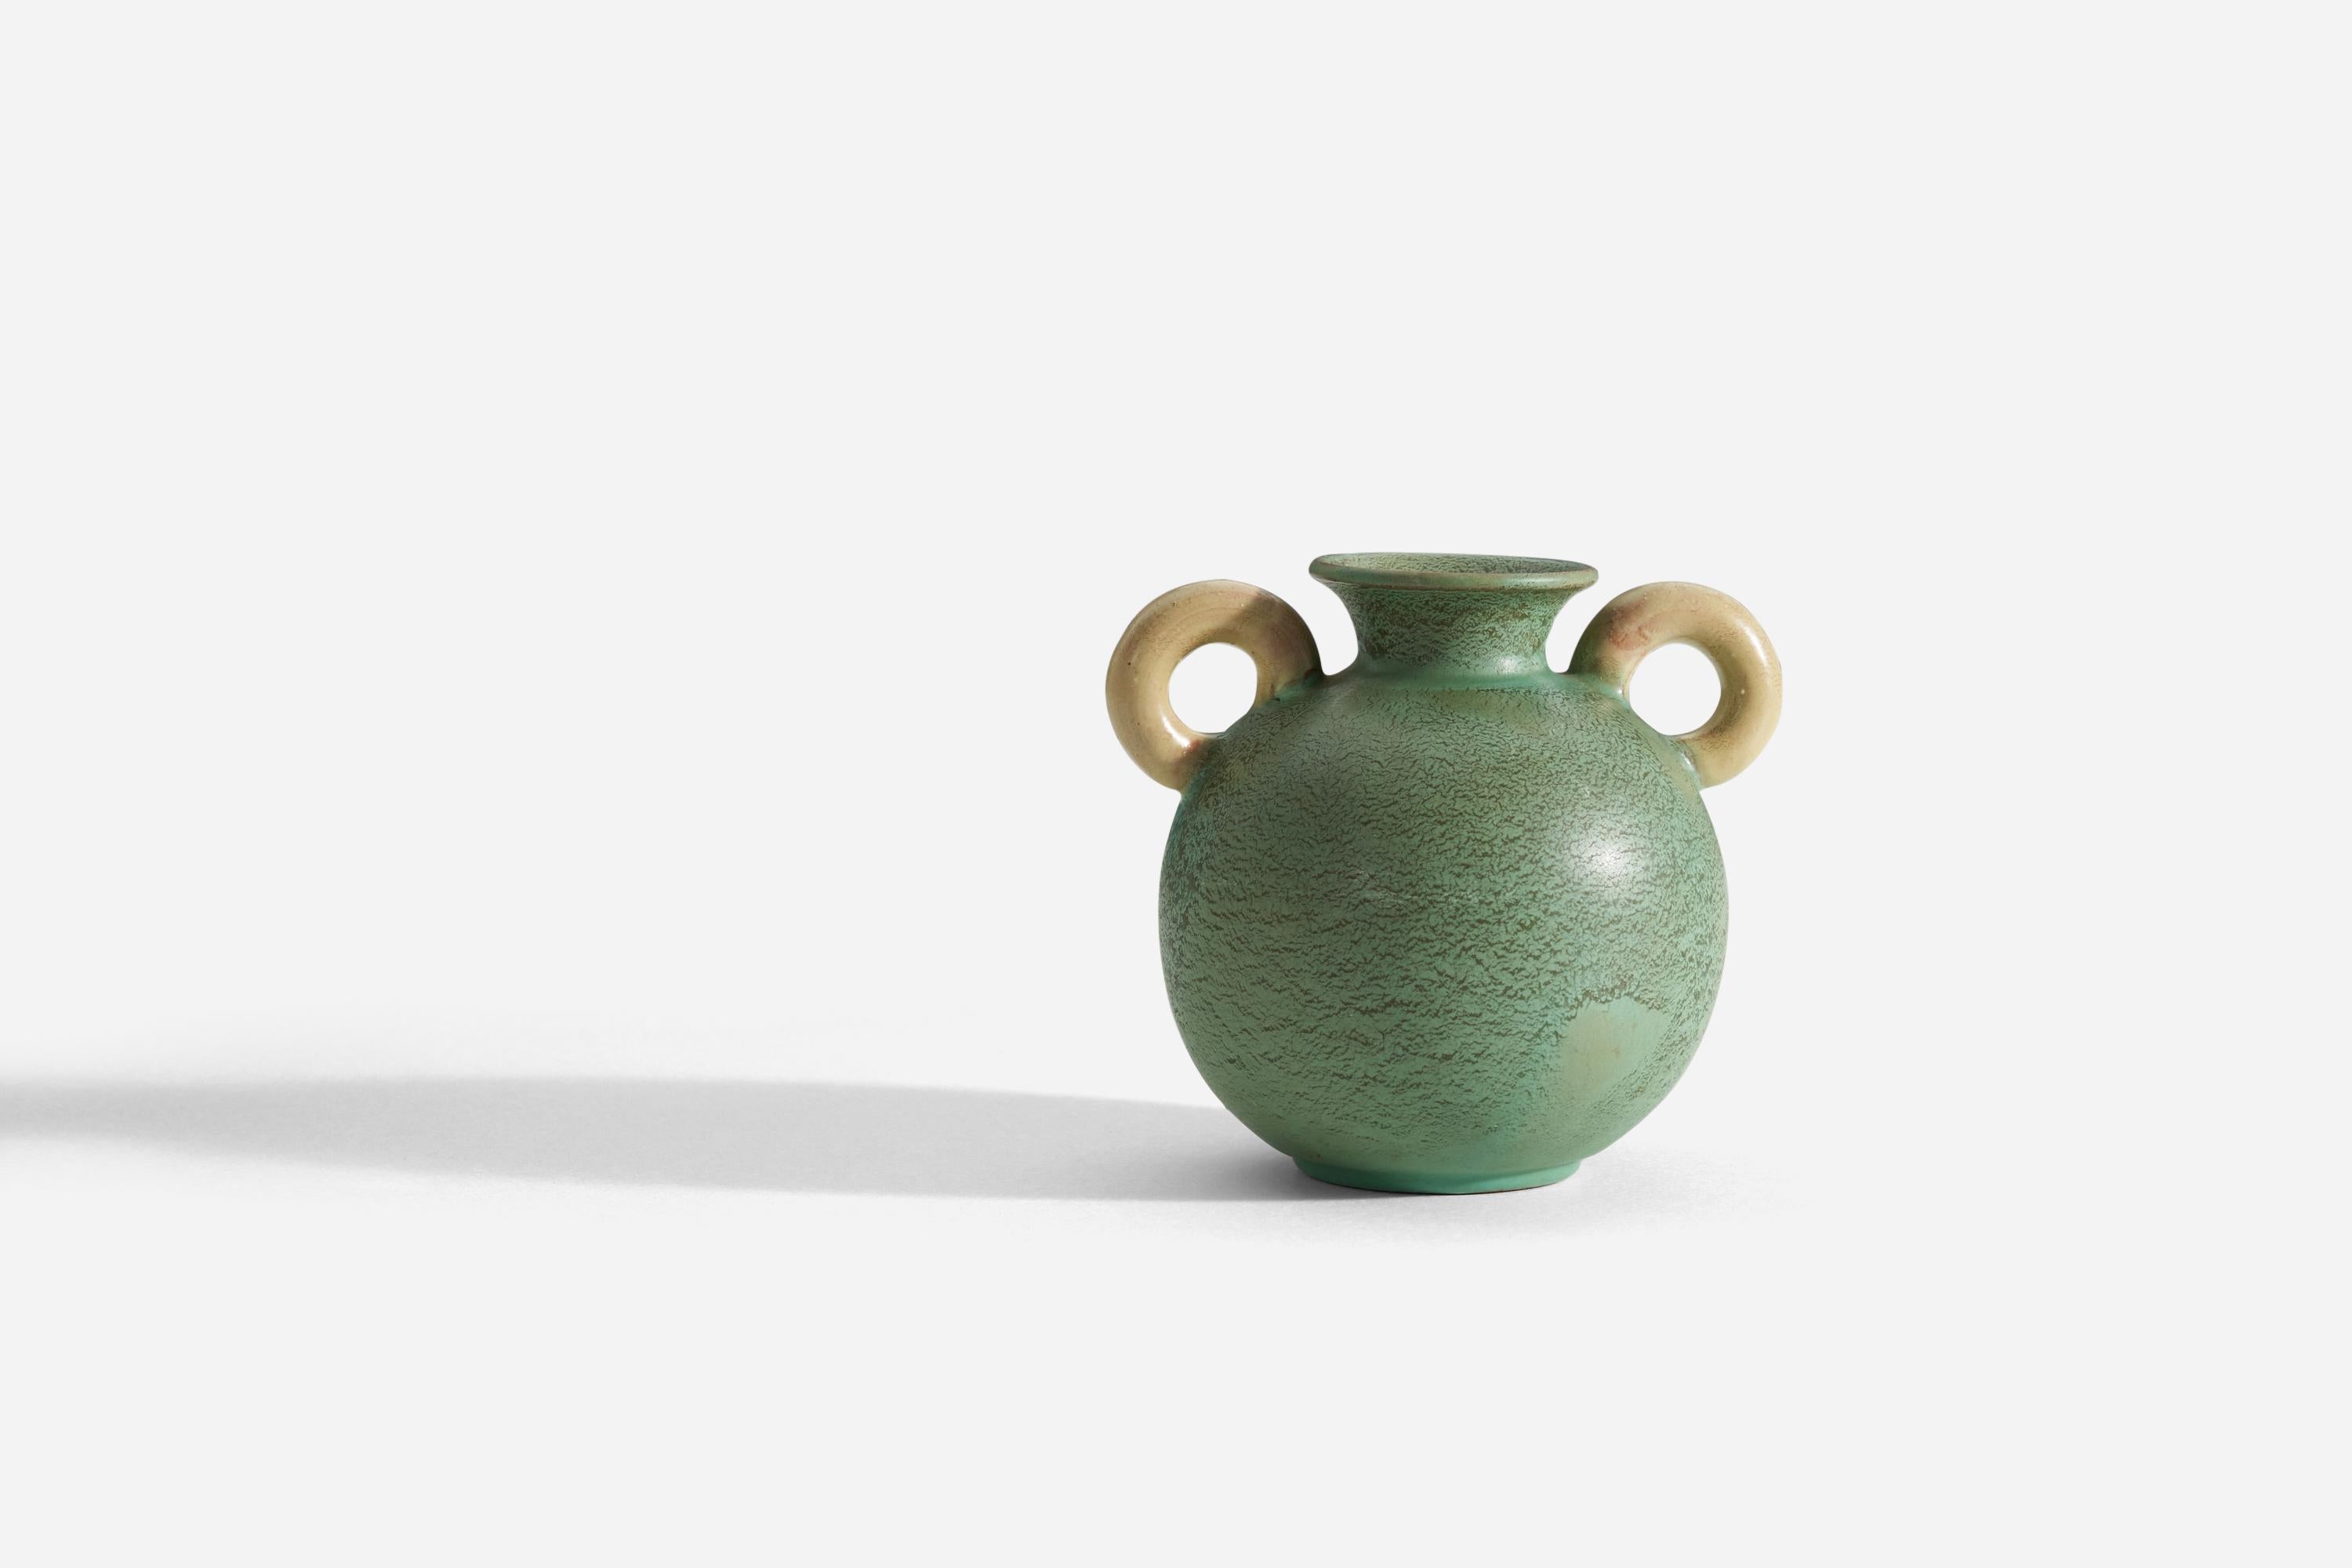 A green-glazed earthenware vase with yellow-cream handles, designed and produced by Gabriel Keramik, Sweden, c. 1930s-1940s.